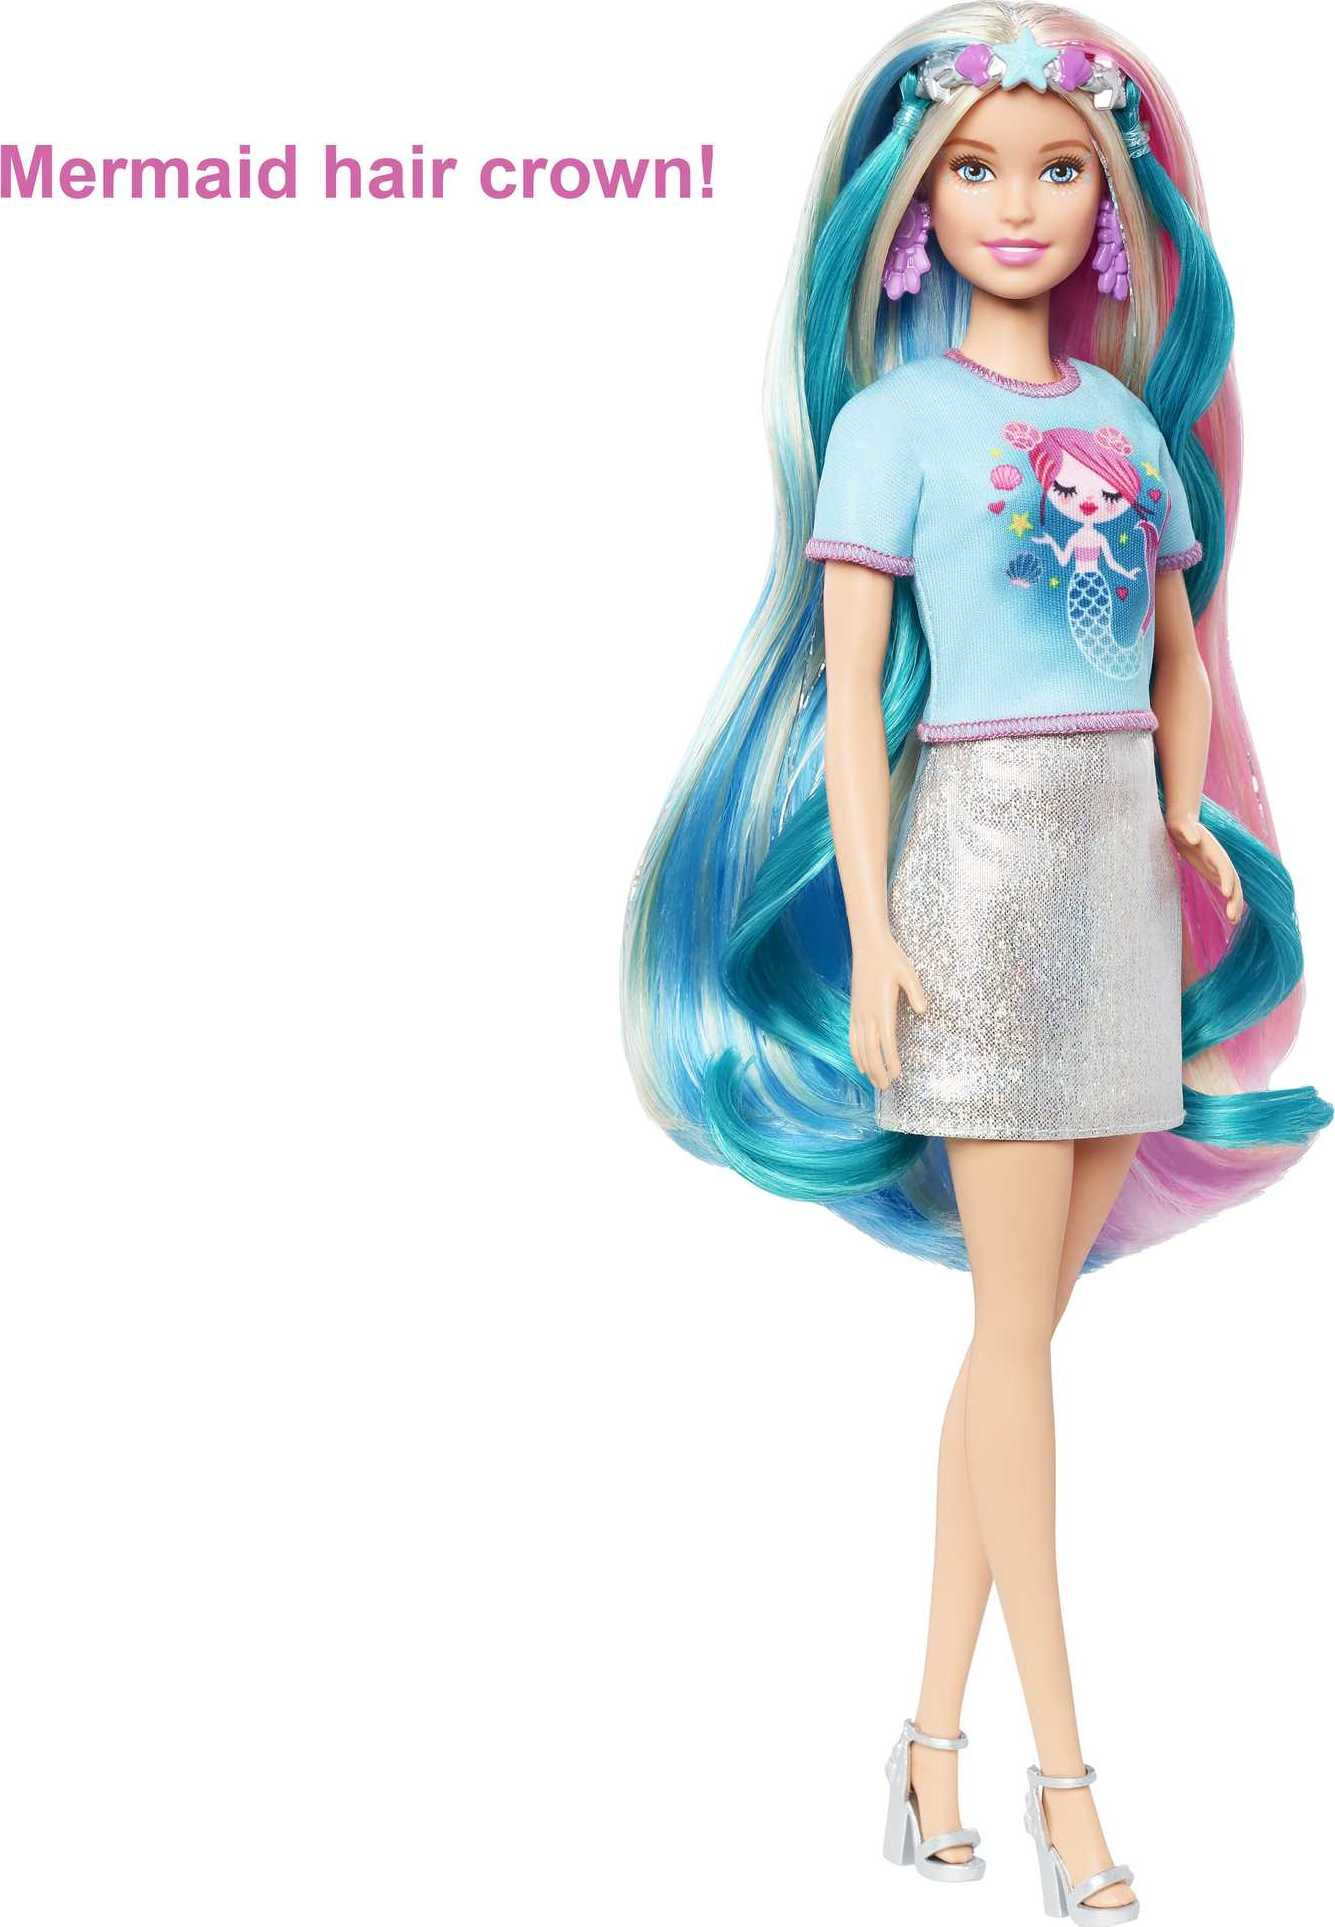 Barbie Fantasy Hair Fashion Doll with Colorful Blonde Hair, Accessories and Clothes - image 3 of 6